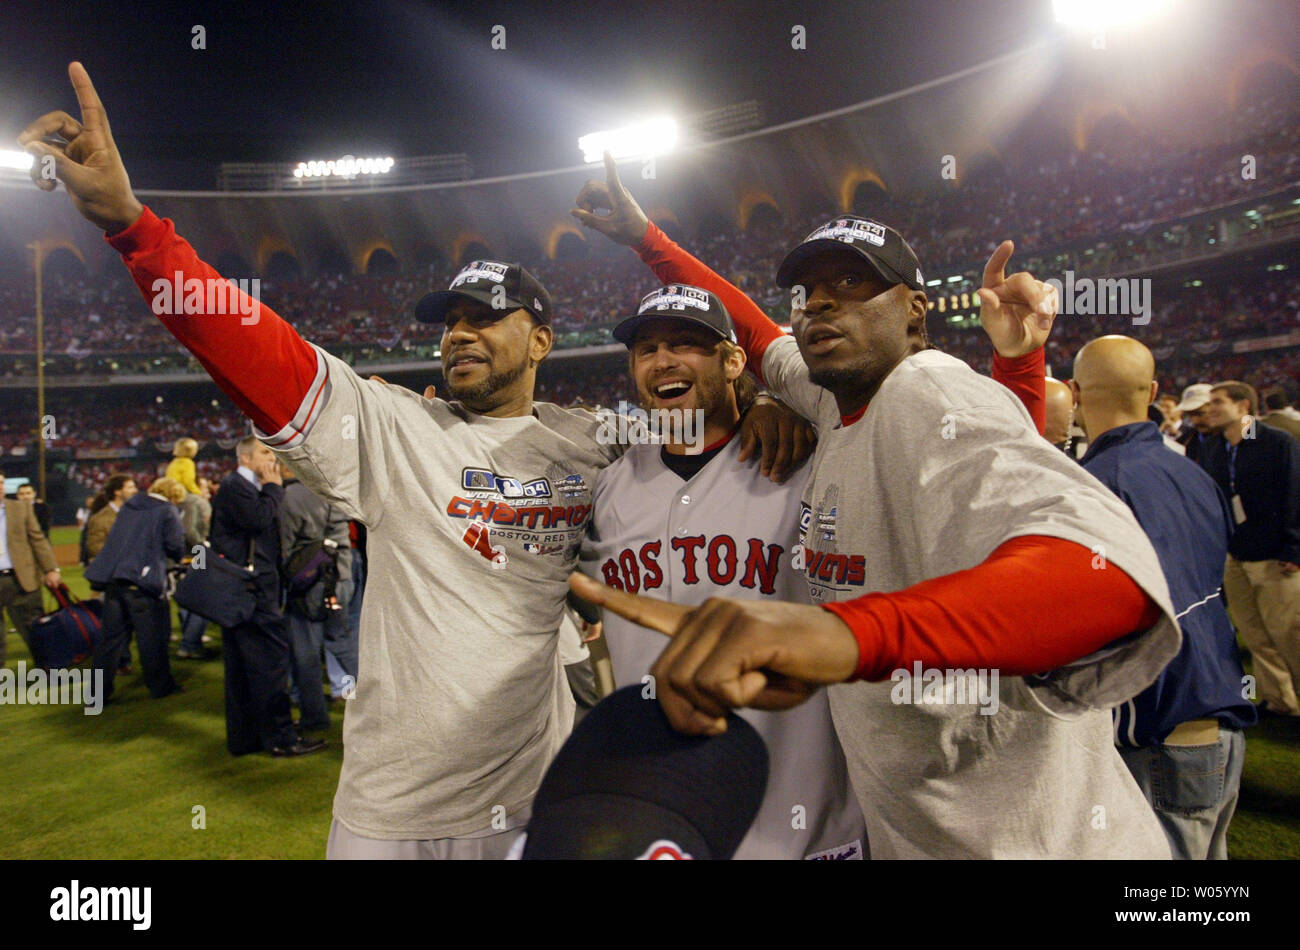 Boston Sports Throwback on X: There was never a lockout when Pokey Reese  was in the league, just sayin' #RedSox #MLB  / X